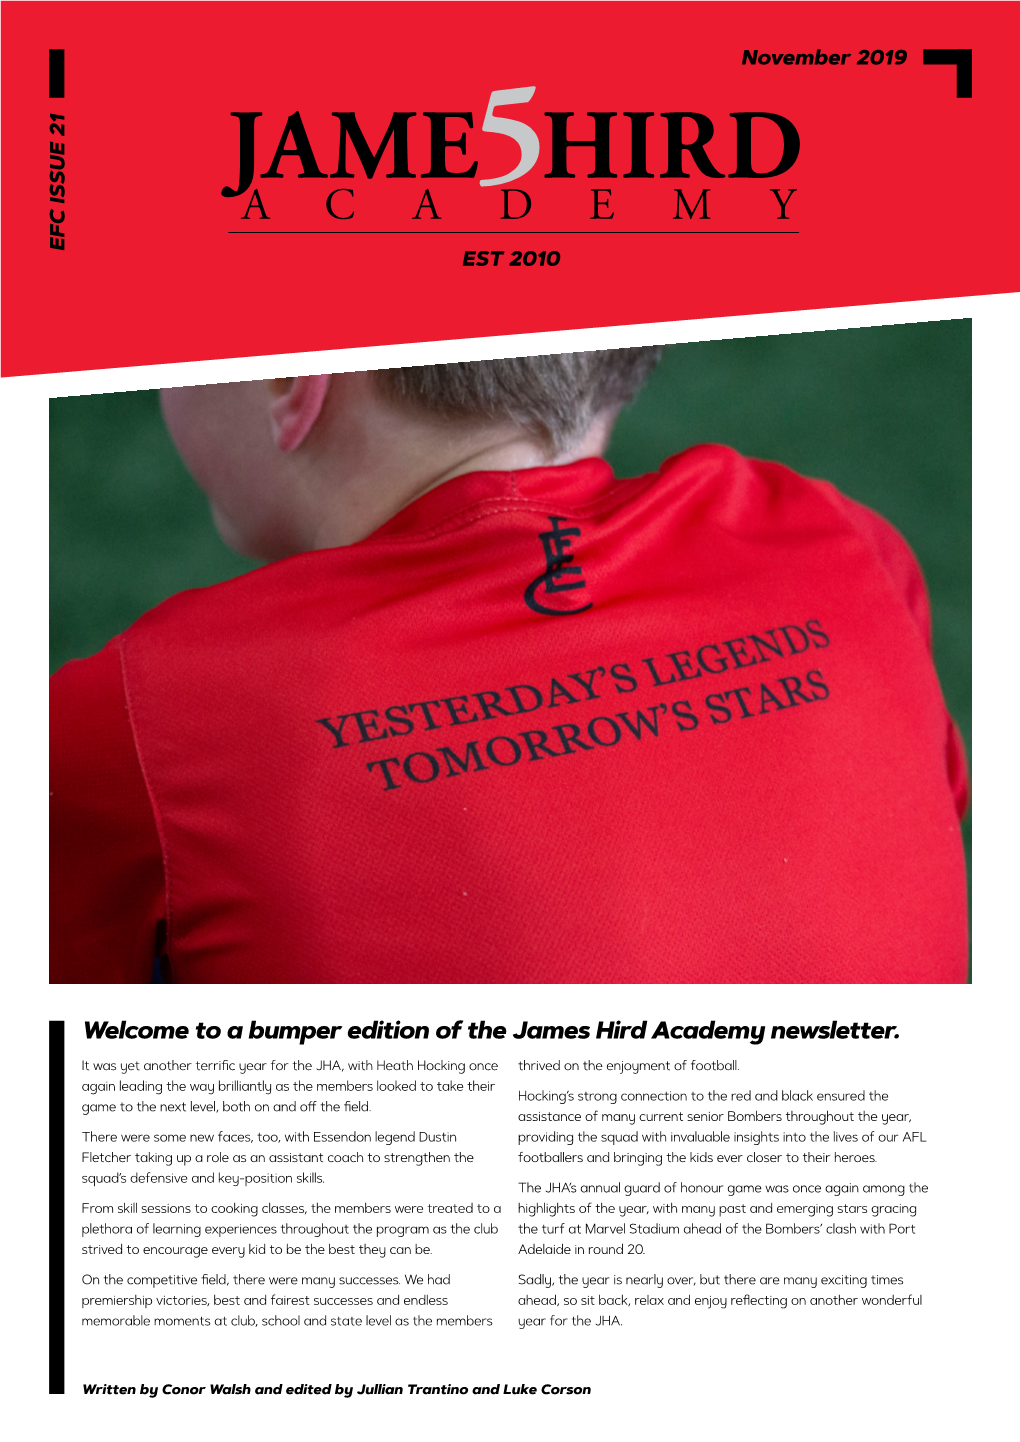 A Bumper Edition of the James Hird Academy Newsletter. It Was Yet Another Terrific Year for the JHA, with Heath Hocking Once Thrived on the Enjoyment of Football